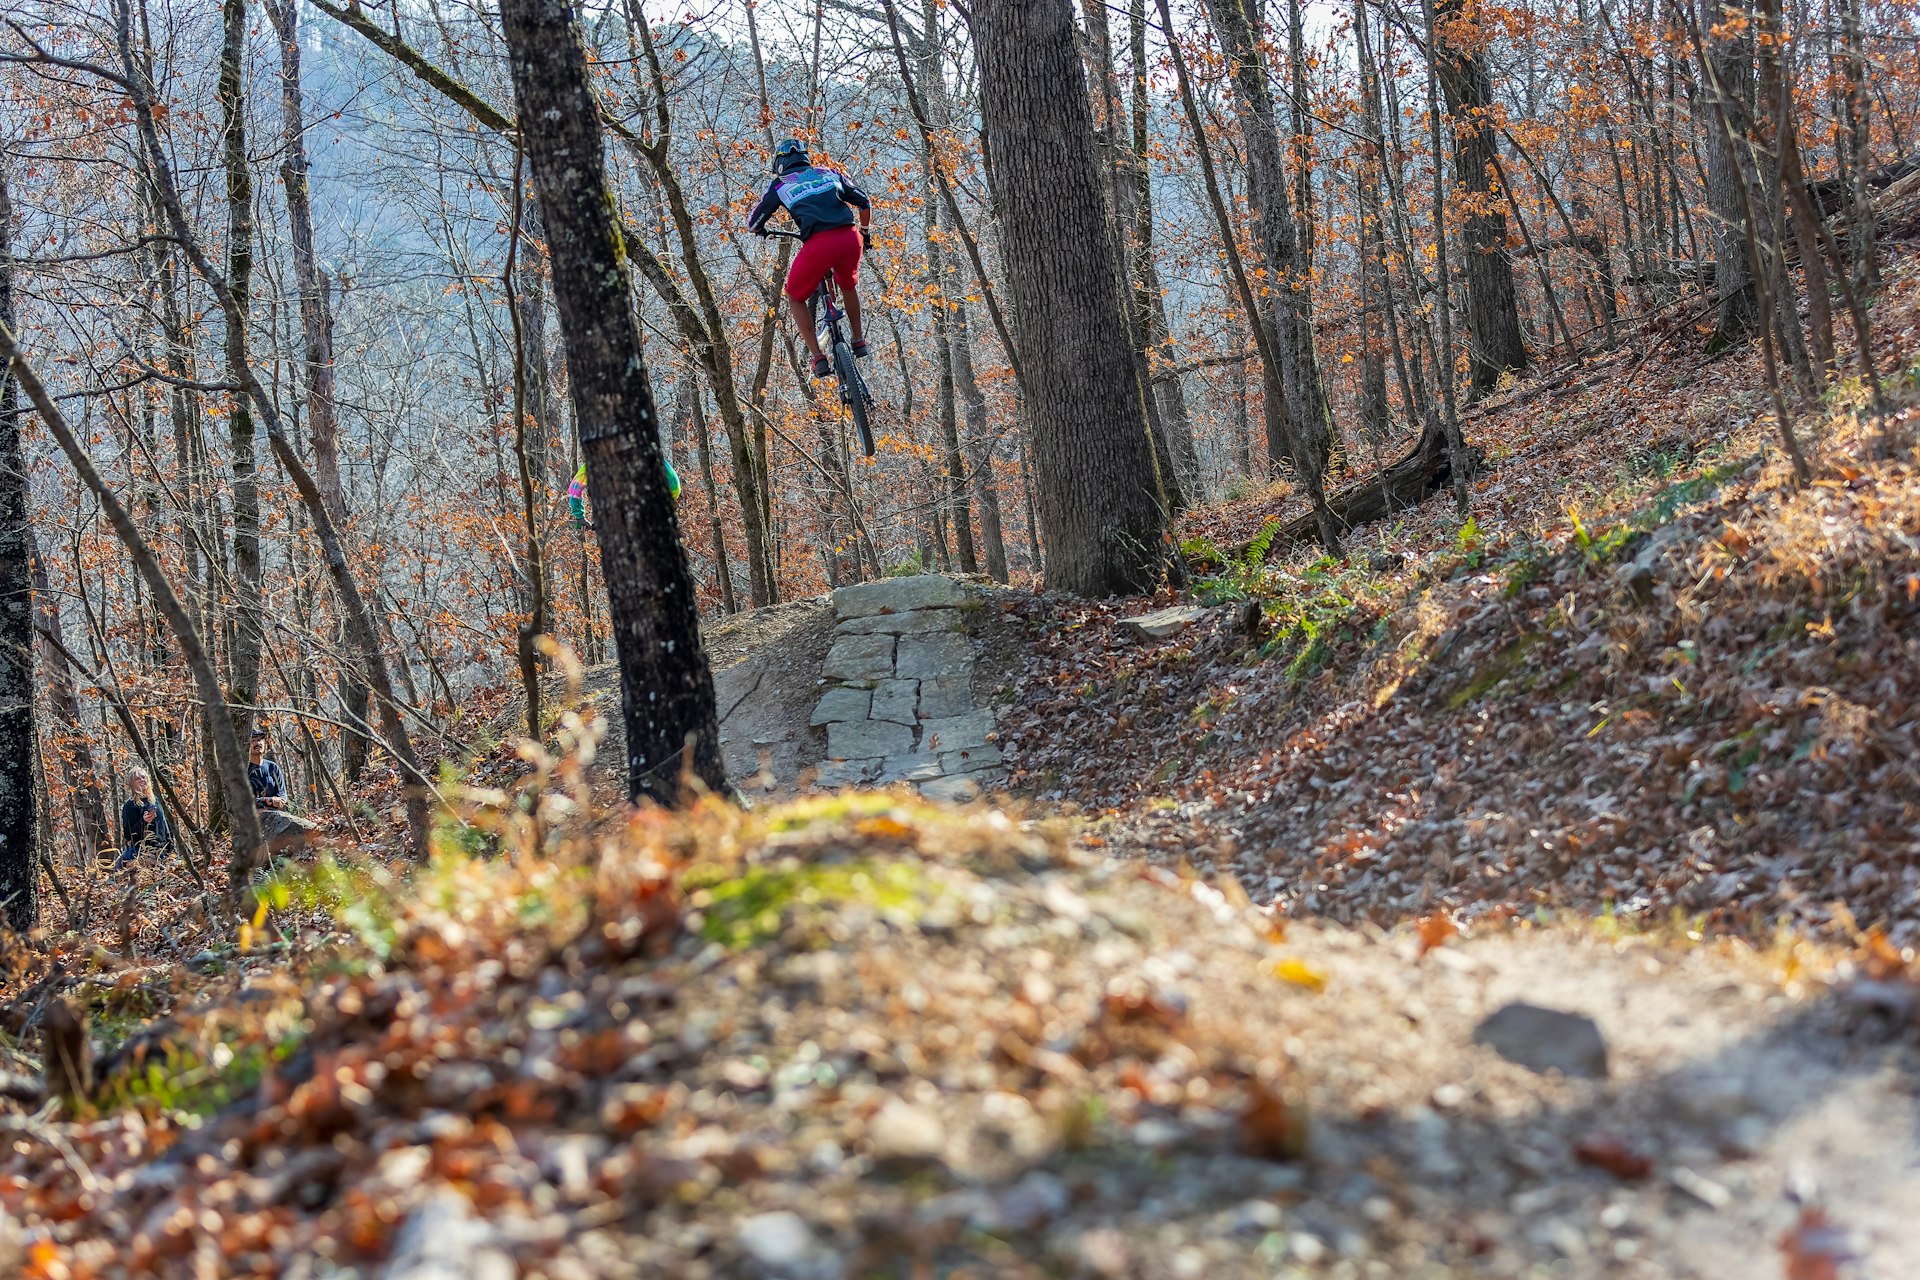 A mountain biker gets some air on a trail in the Ozarks